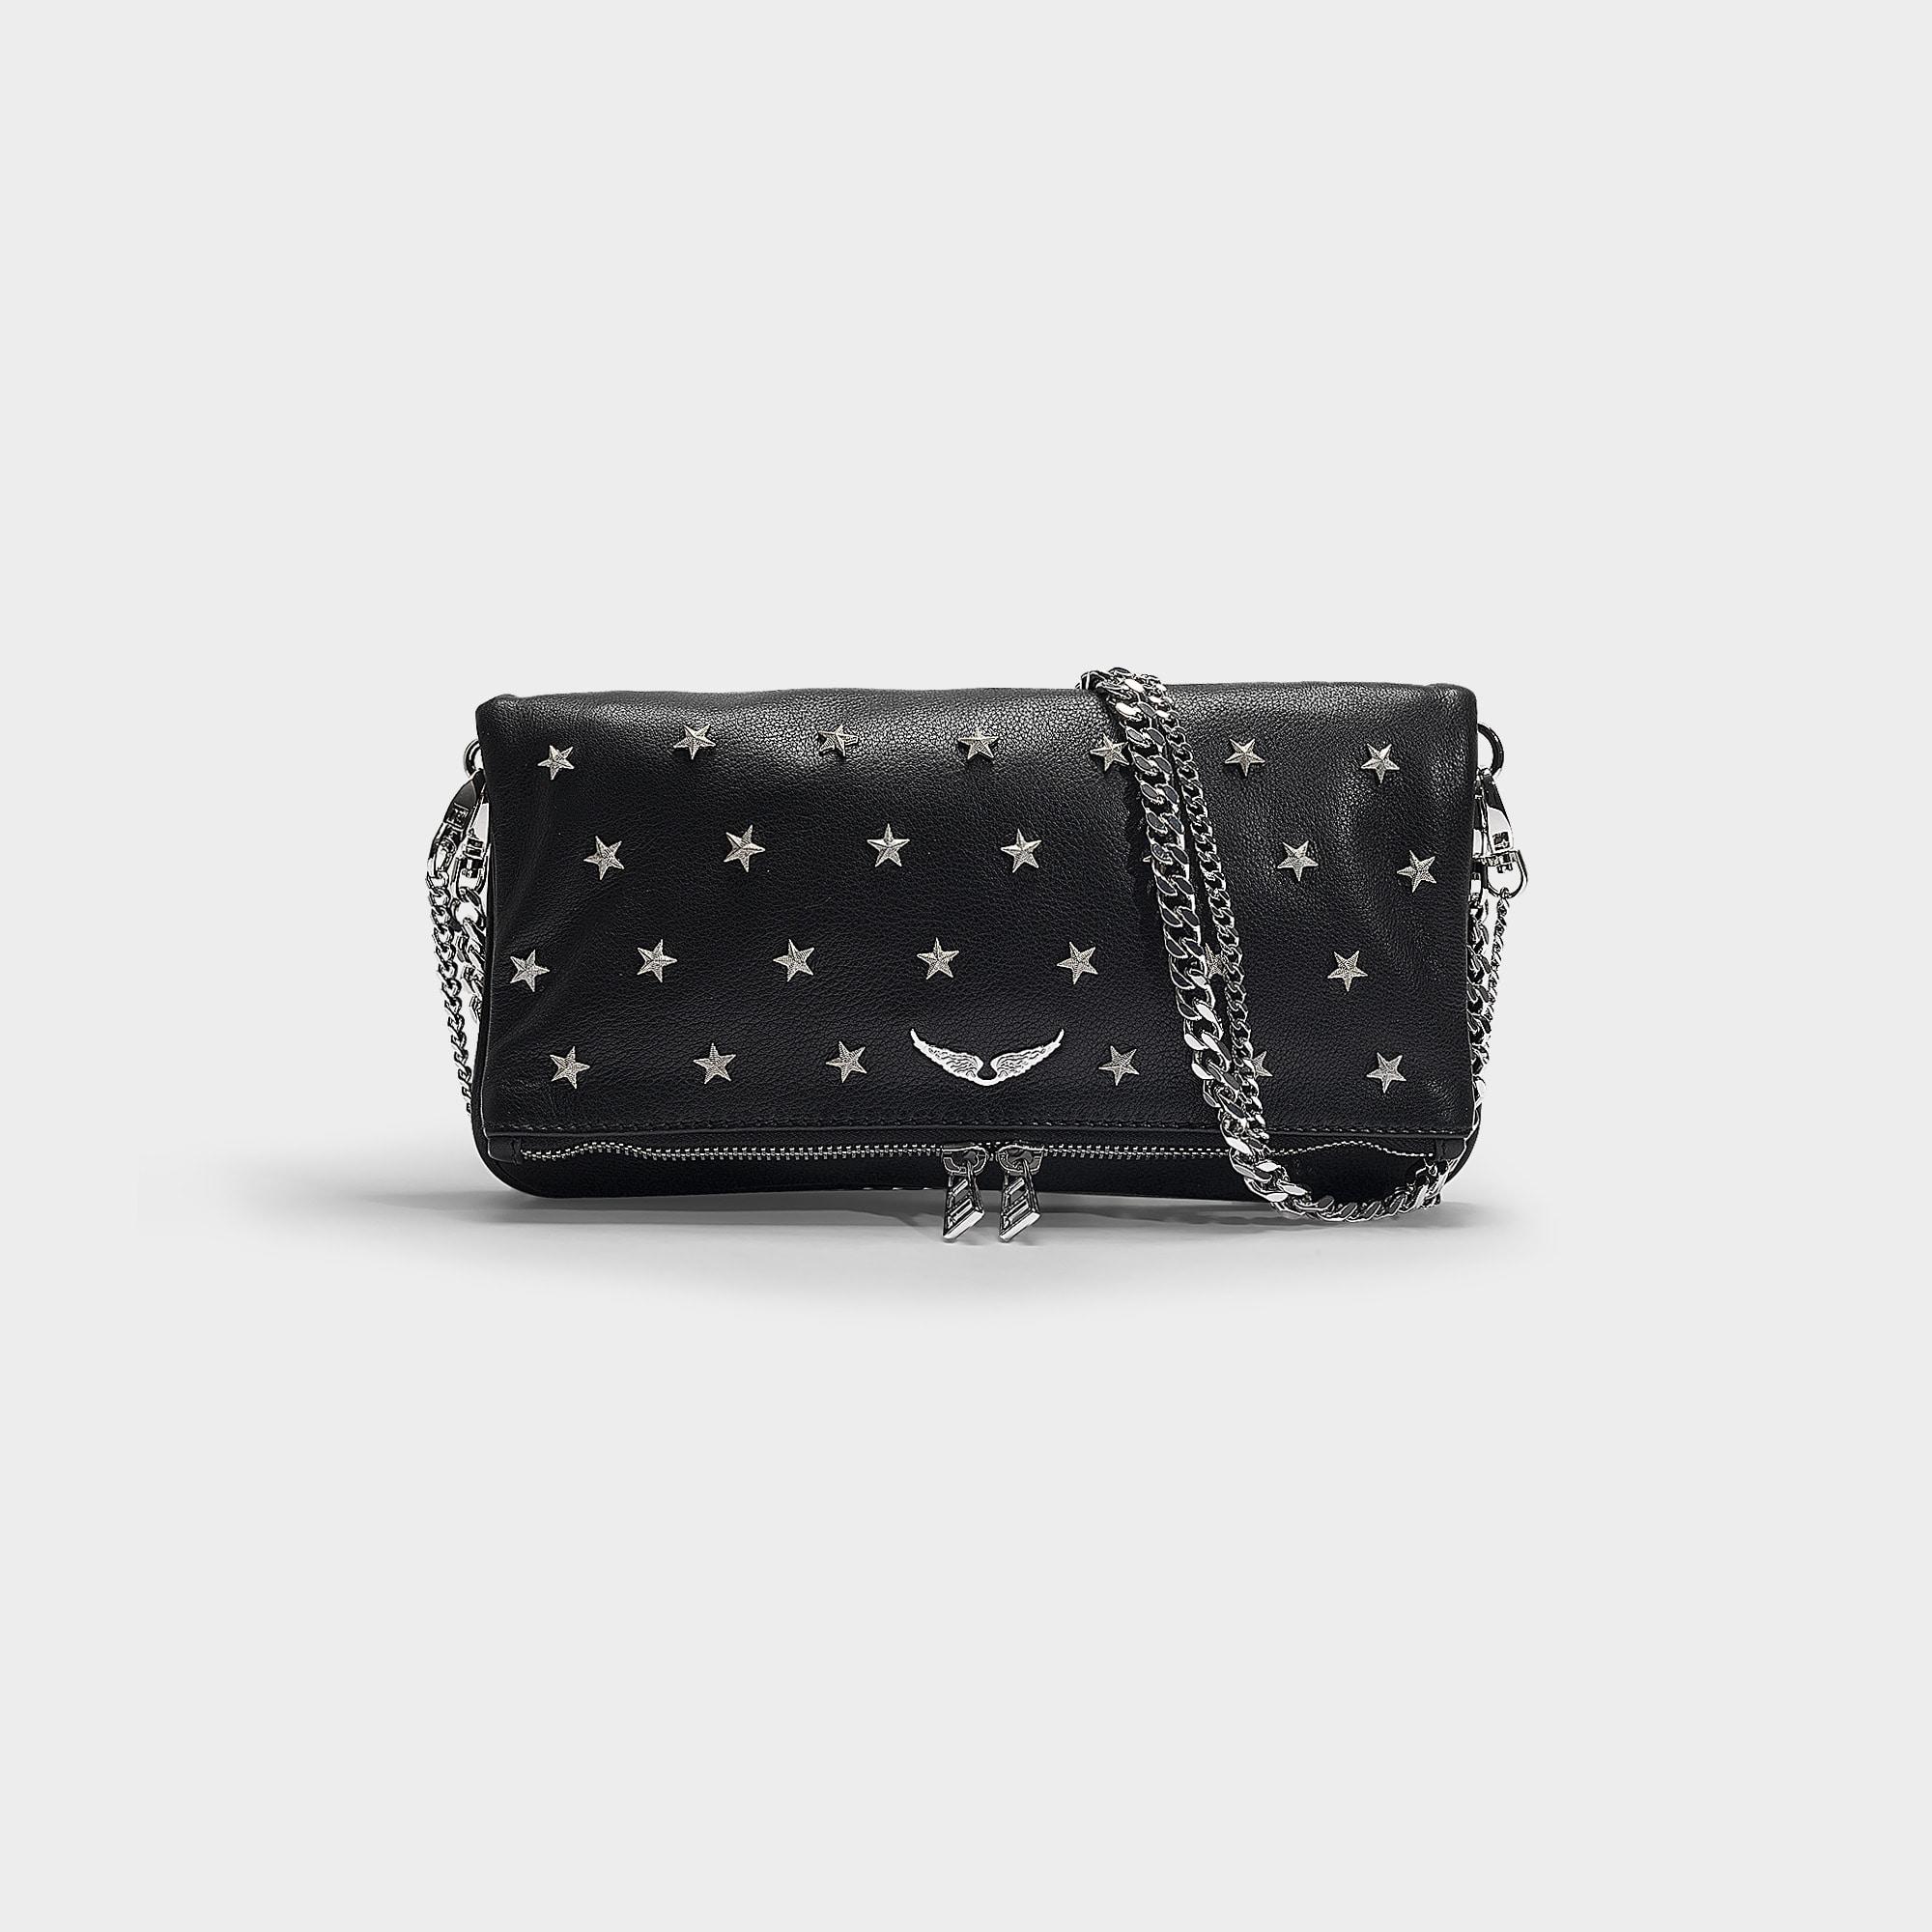 Zadig & Voltaire Rock Grained Leather Clutch Bag - Relax – Styleartist